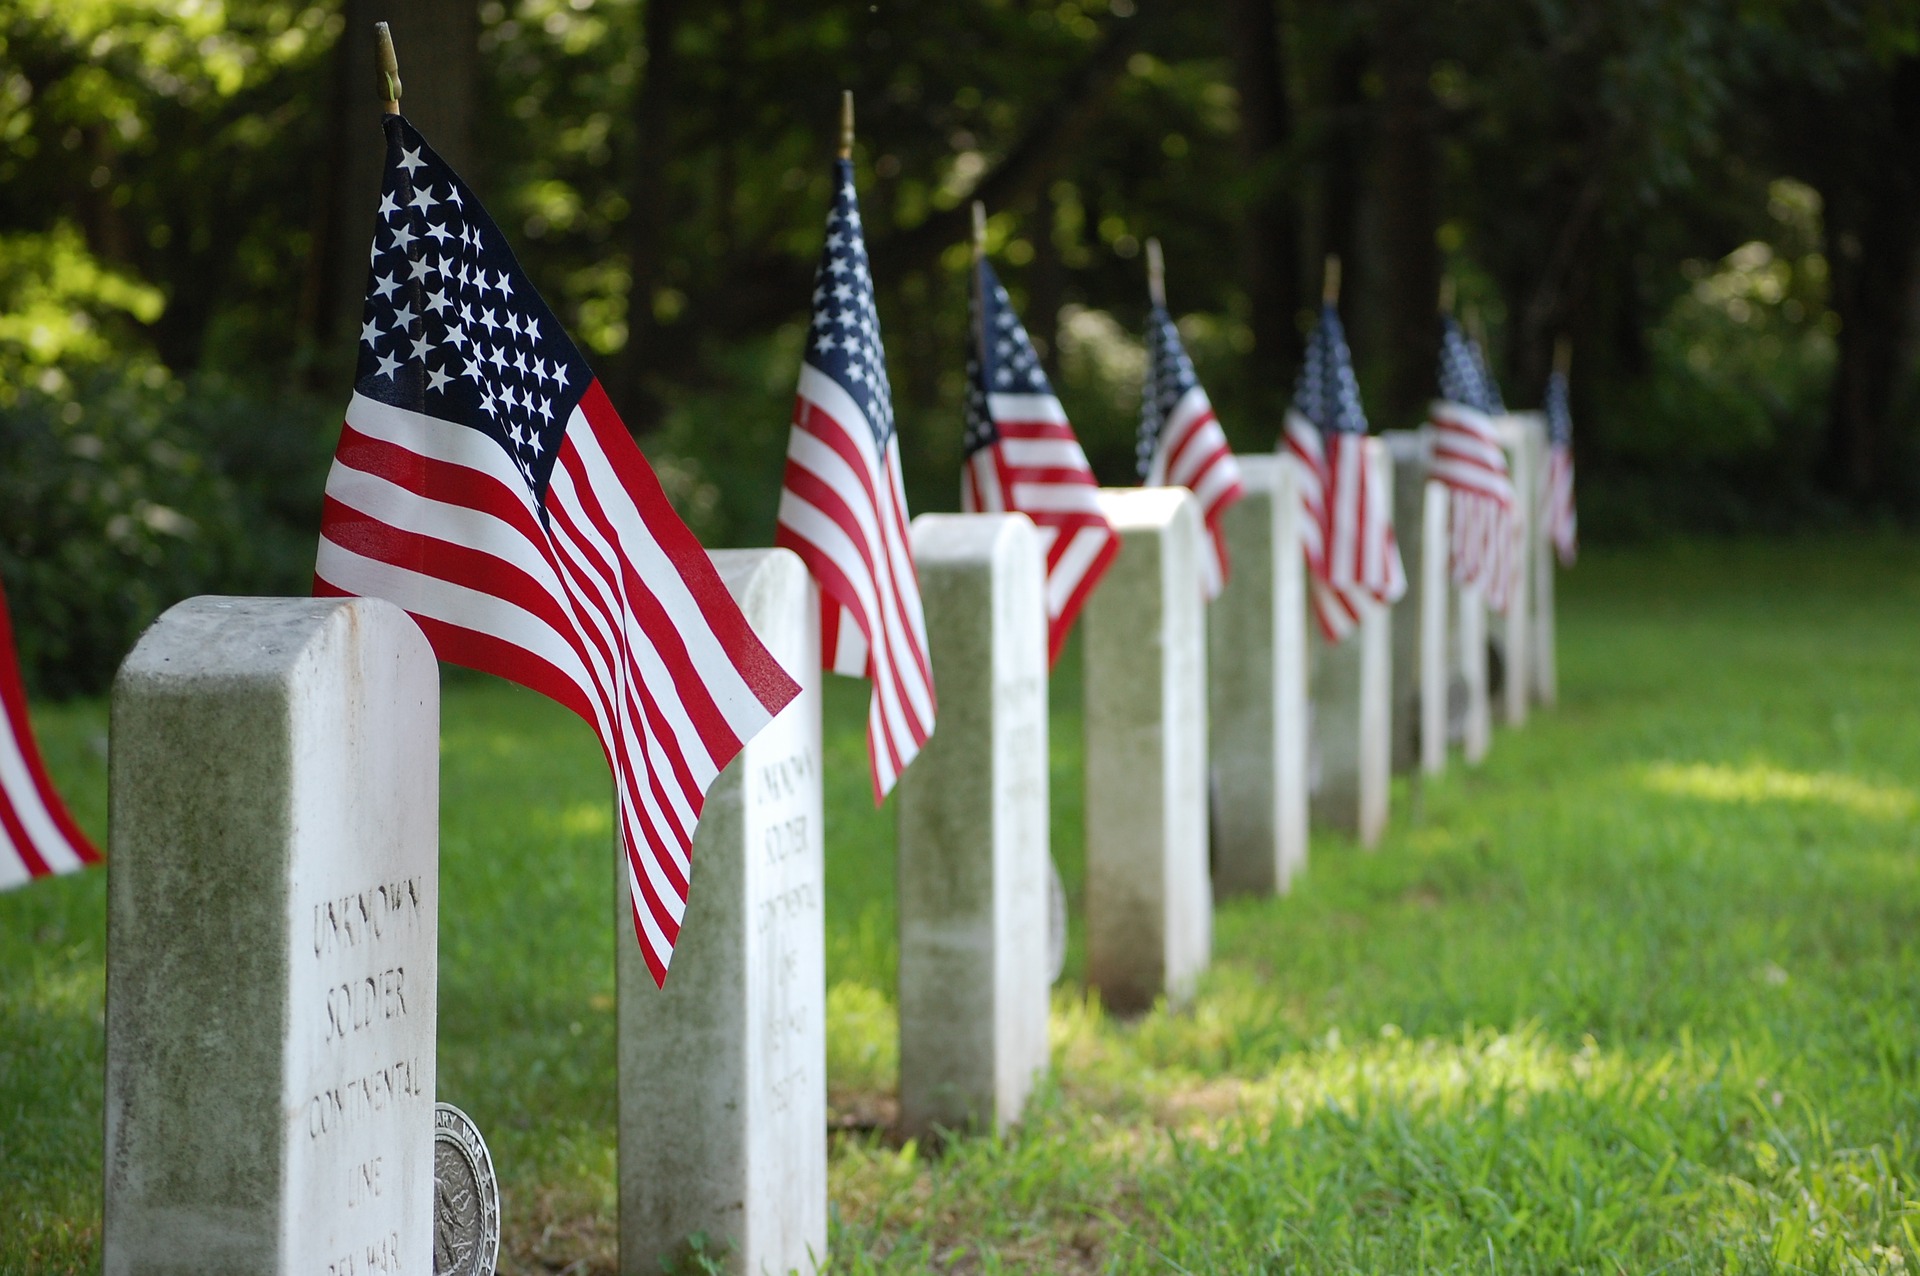 Military cemetery upright headstones with US flags